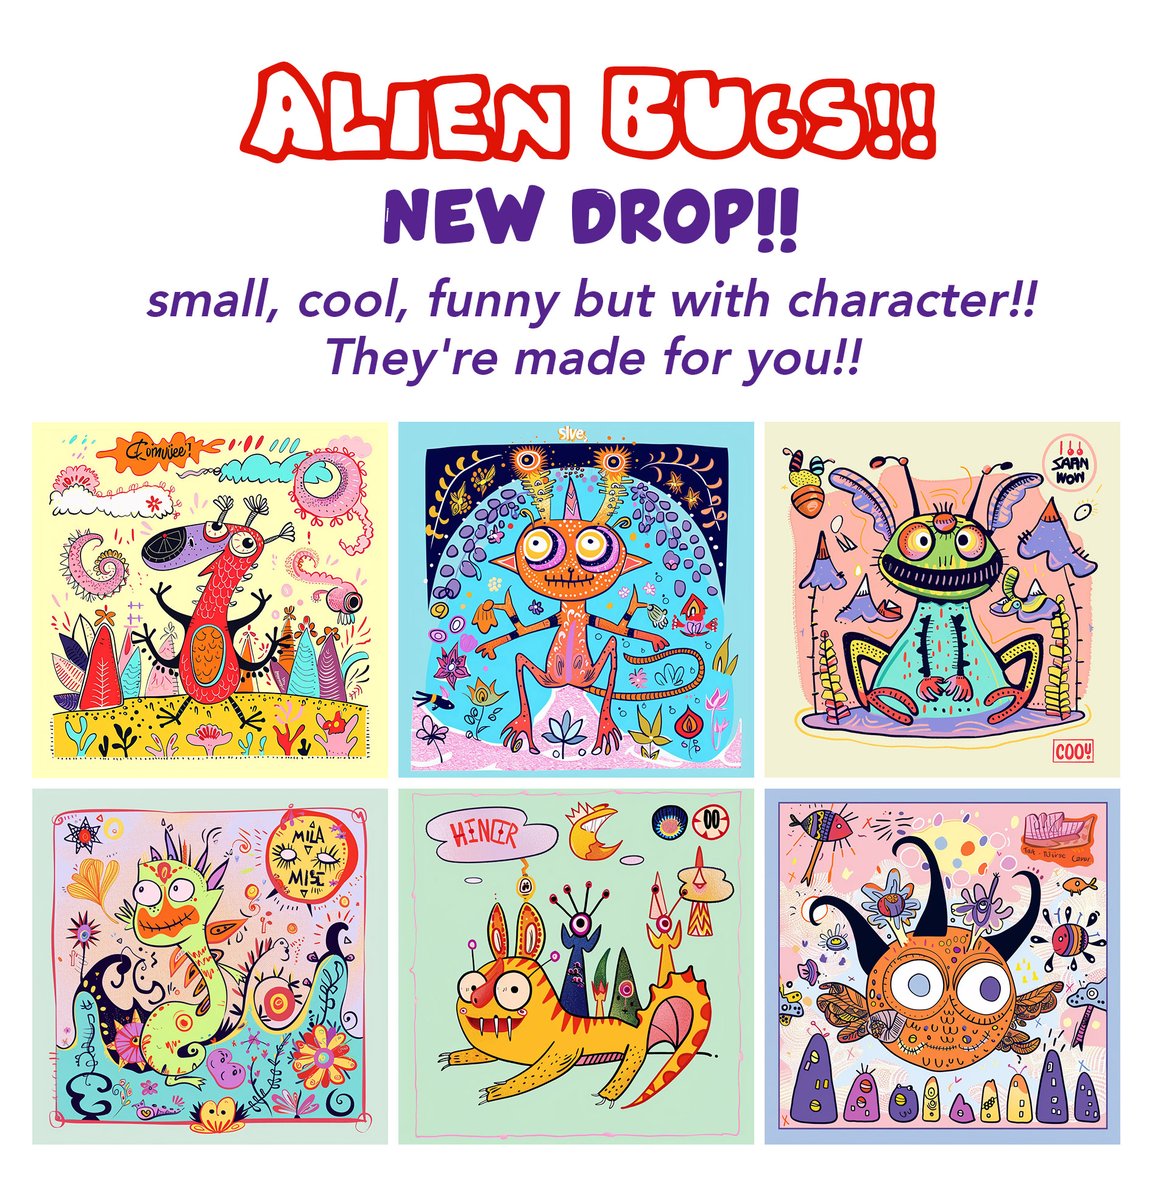 🚨 ALIEN BUGS!! 🤗 NEW DROP!! 
#TEZOSTUESDAY
The collection is growing!! 🚀
6 NEW Alien Bugs are now on our planet and waiting to be check out!
Each one has a unique history. Don't forget to read it! 🥰

All unique —> 2 xtz
Listed 36 / Sold 29

objkt.com/users/tz2QMAAD…

#tezosart